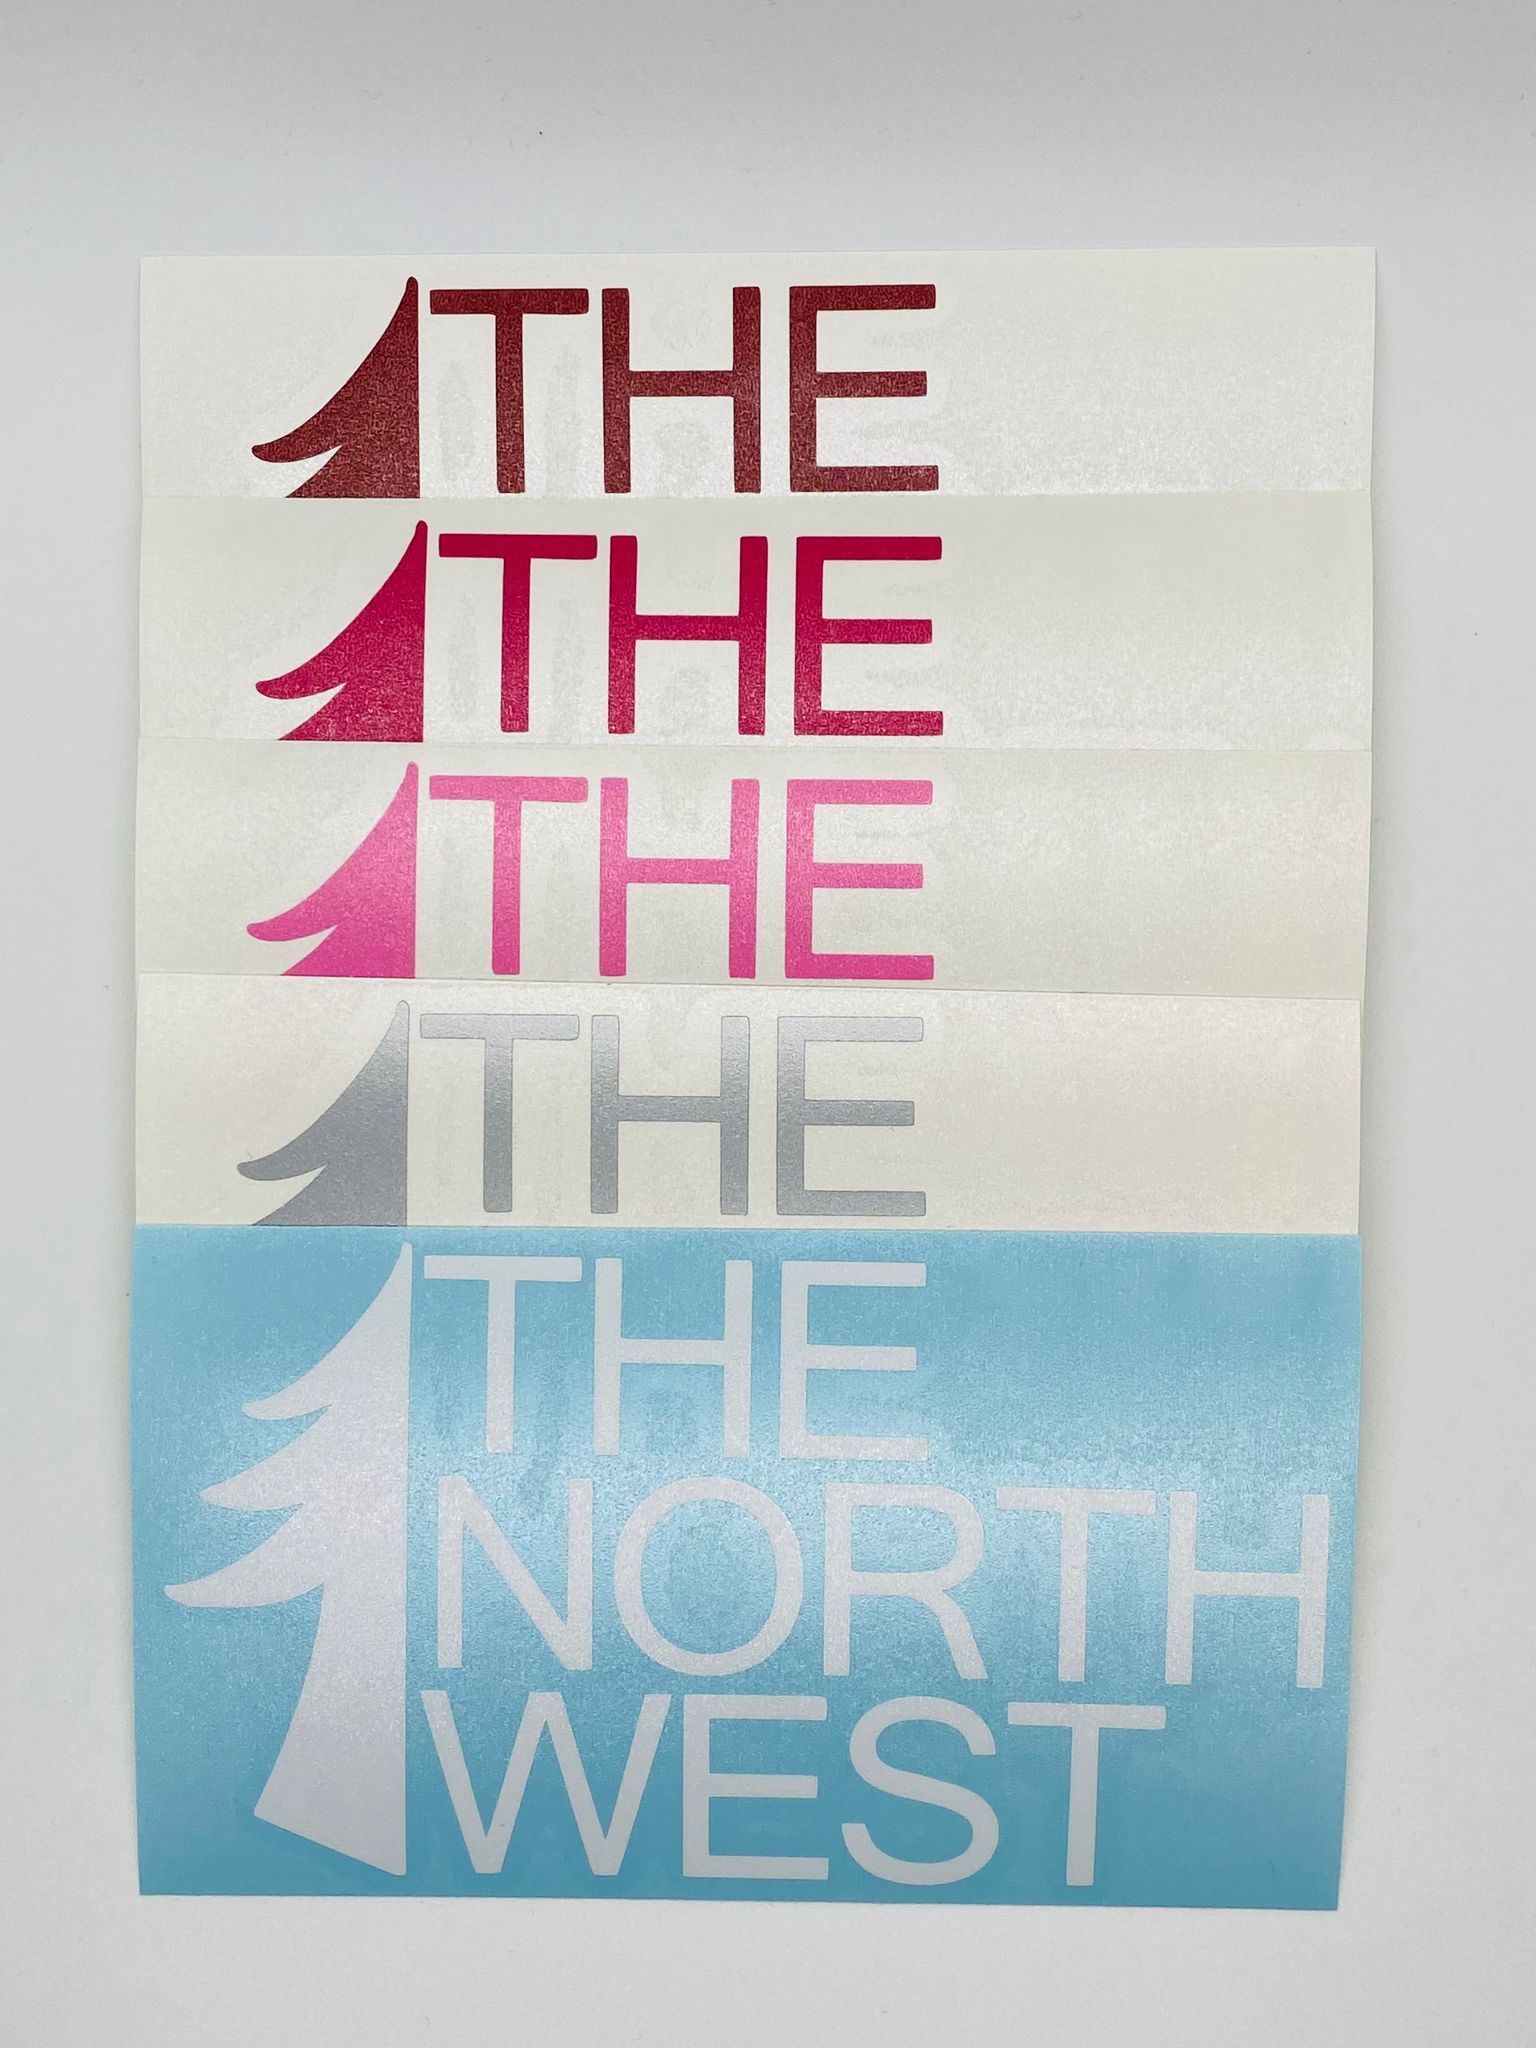 The North West Decal Pack of 5